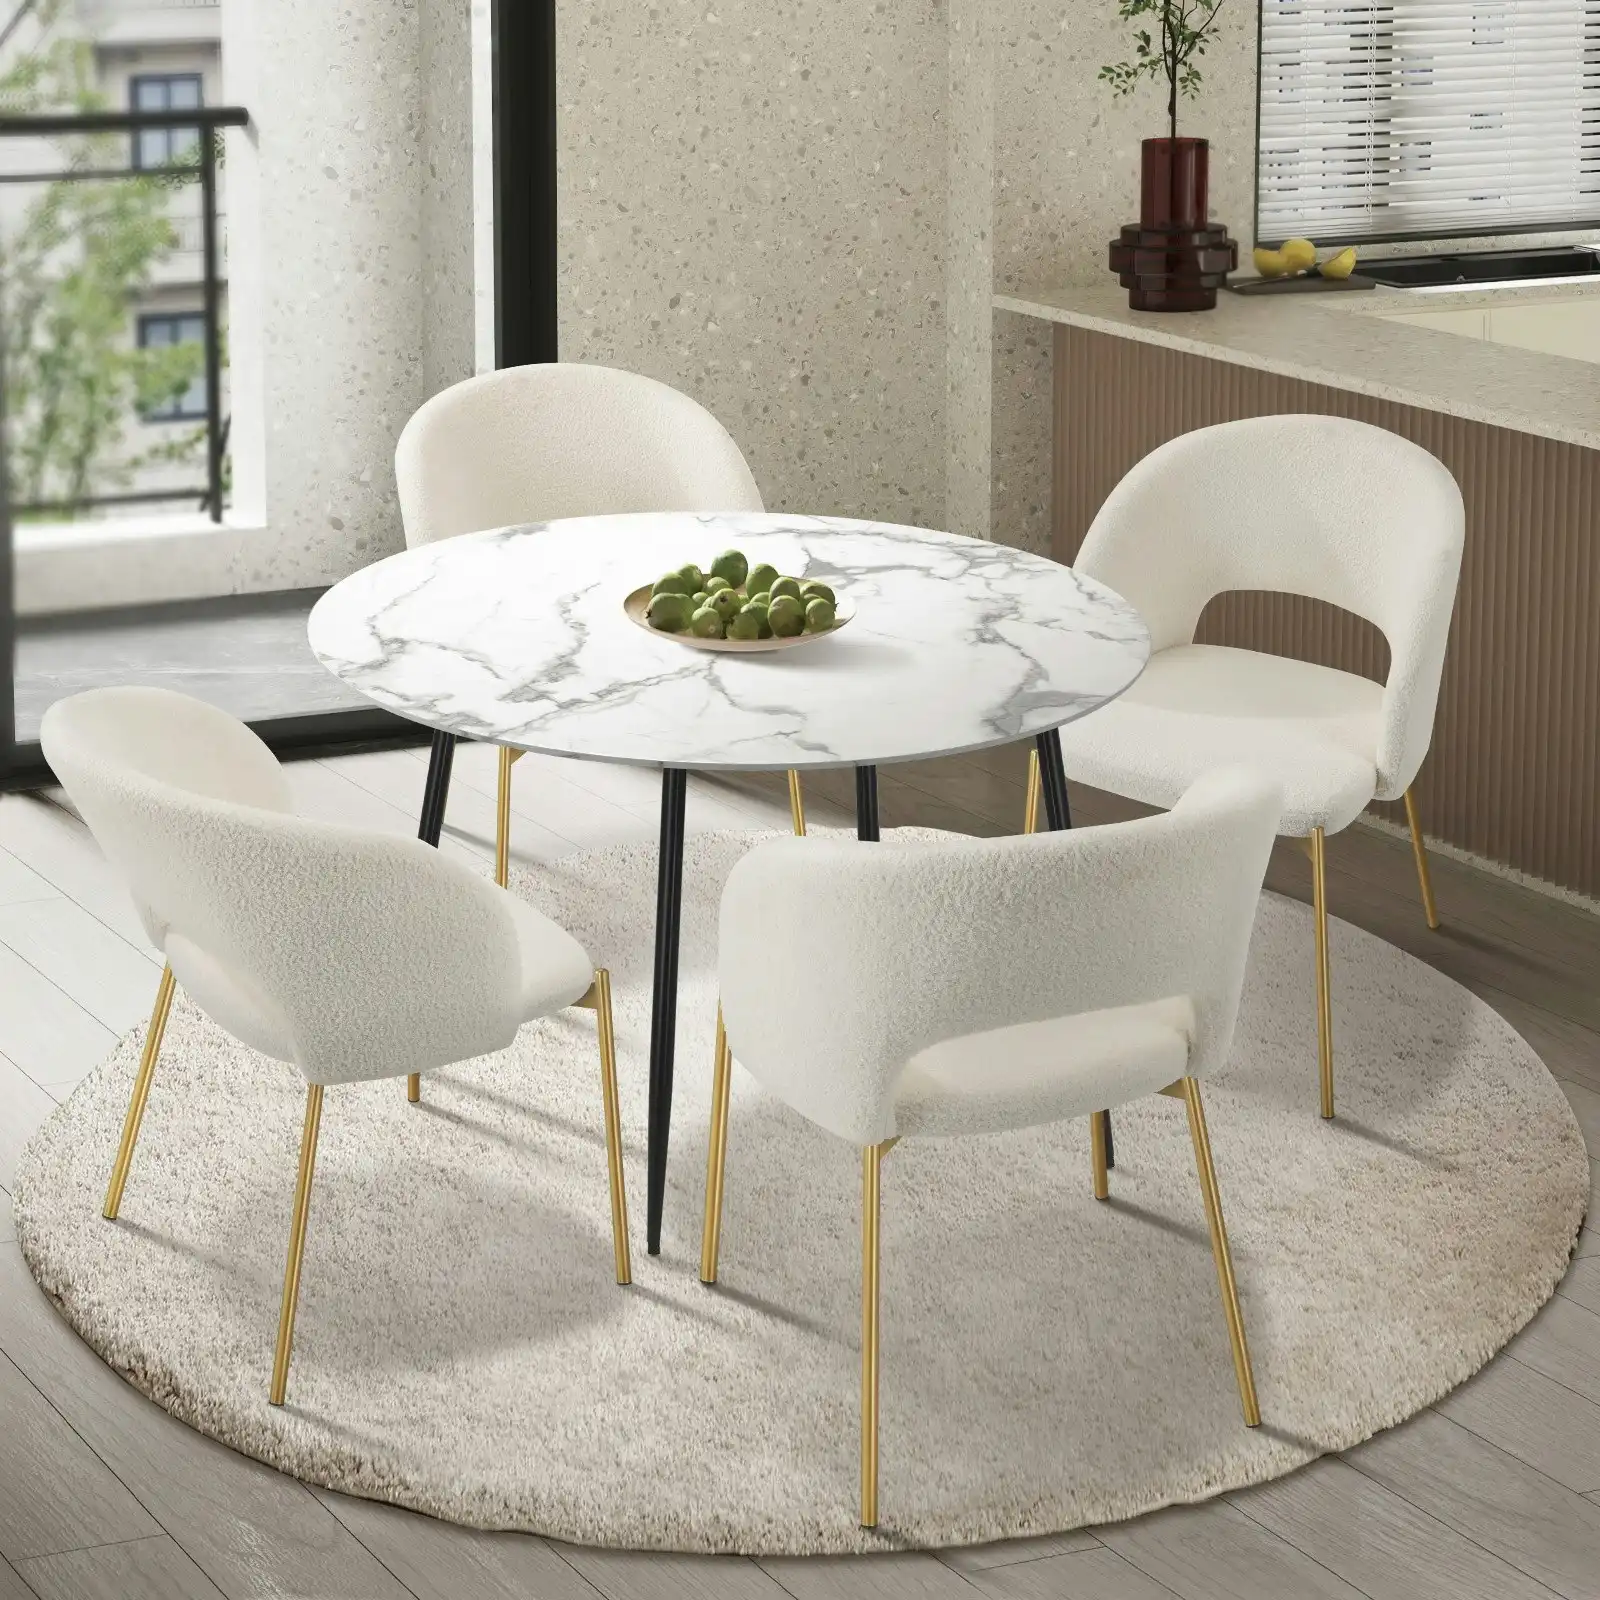 Oikiture 5PCS Dining sets 110cm Round Table with 4PCS Chairs Sherpa White&Gold